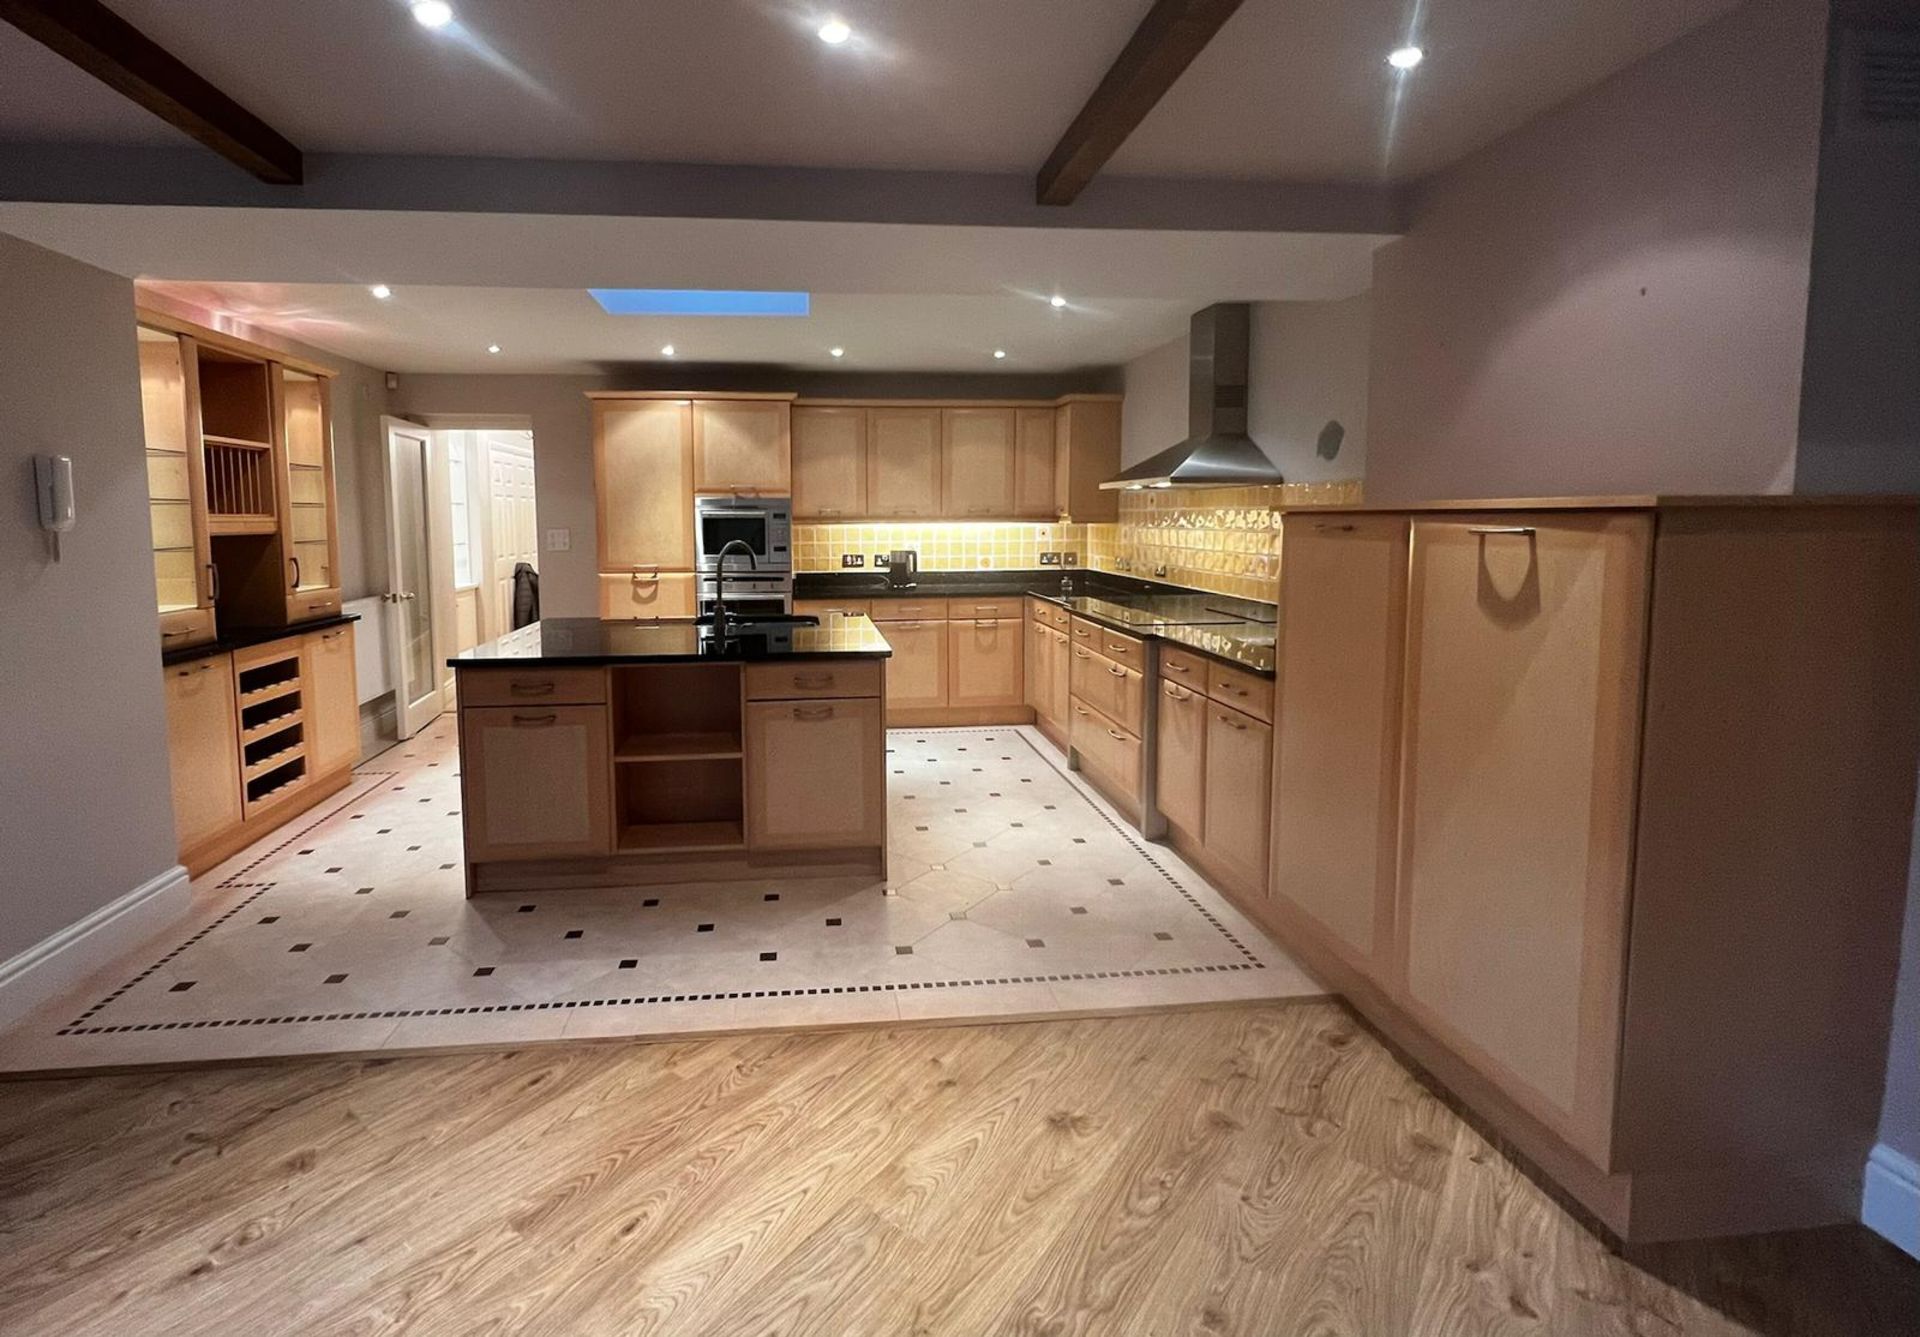 1 x English Rose Bespoke Fitted Kitchen With 30mm Granite Worktops, Integrated Neff Appliances And